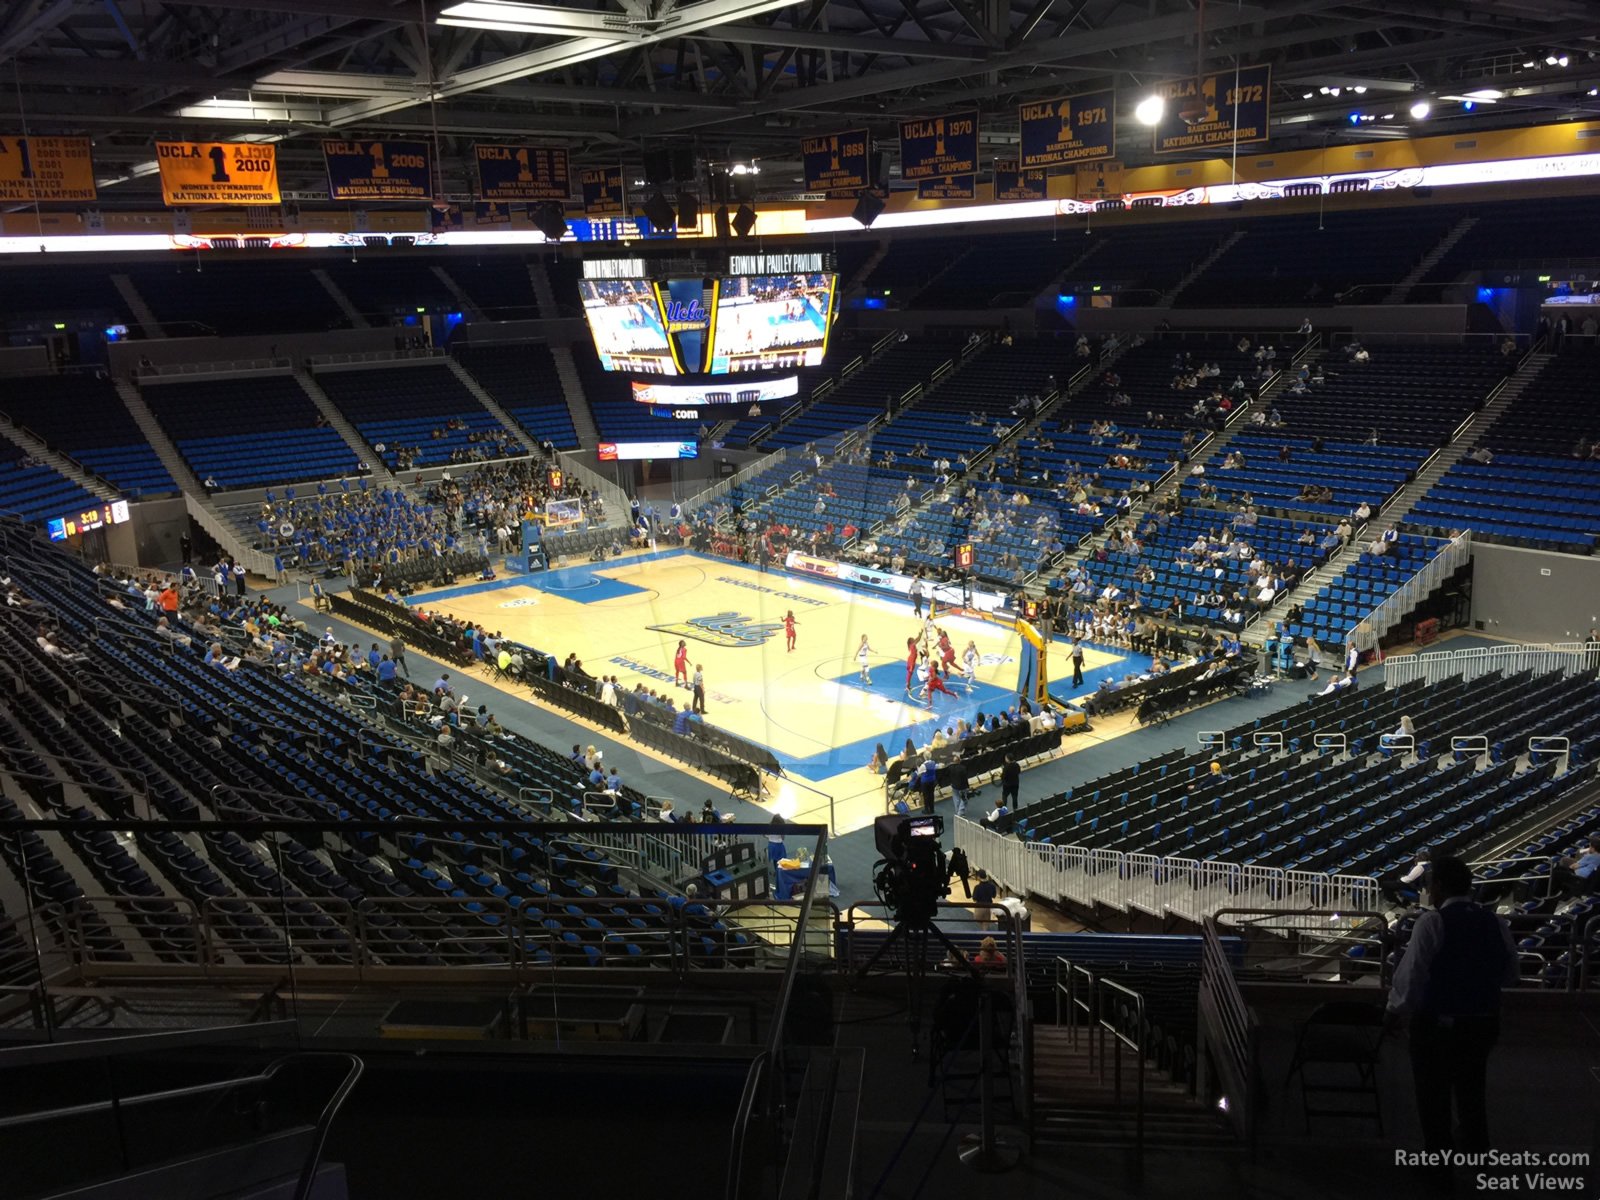 section 211b, row 6 seat view  - pauley pavilion